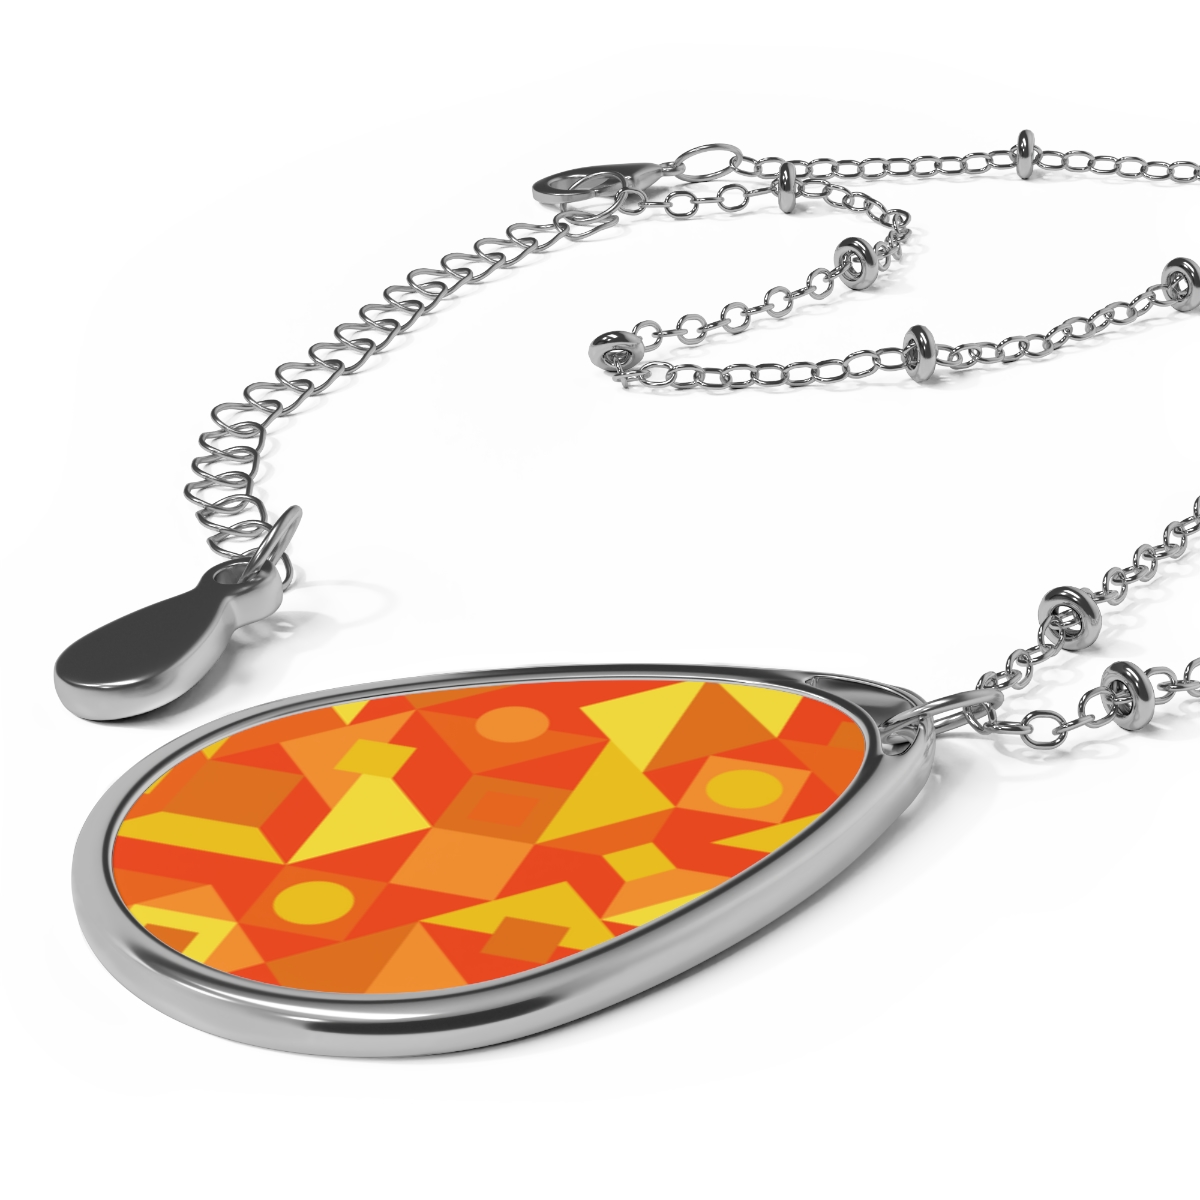 Oval Necklace product thumbnail image